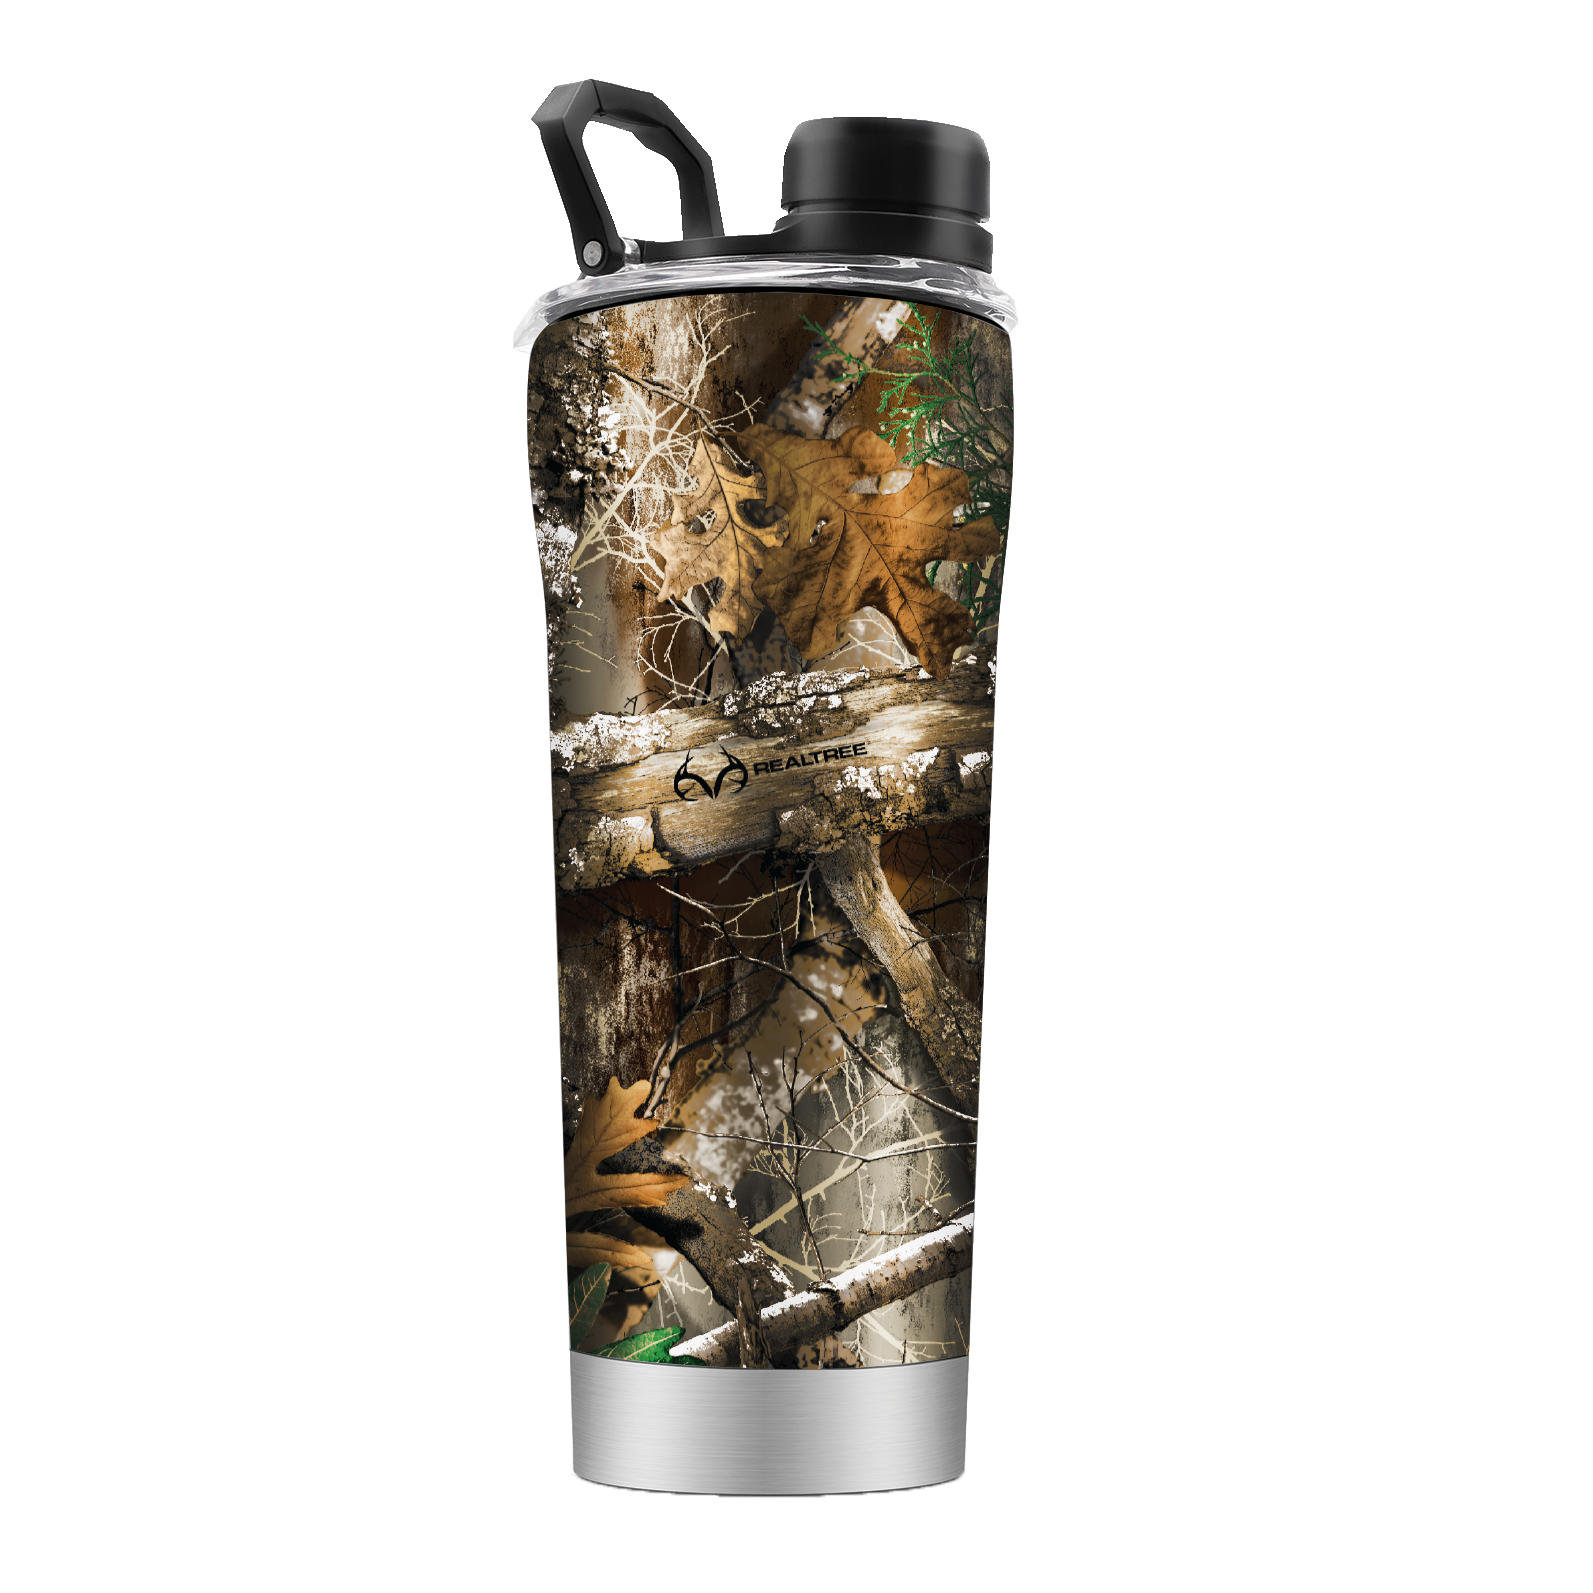 Realtree Camo 20oz Stainless Steel Shaker